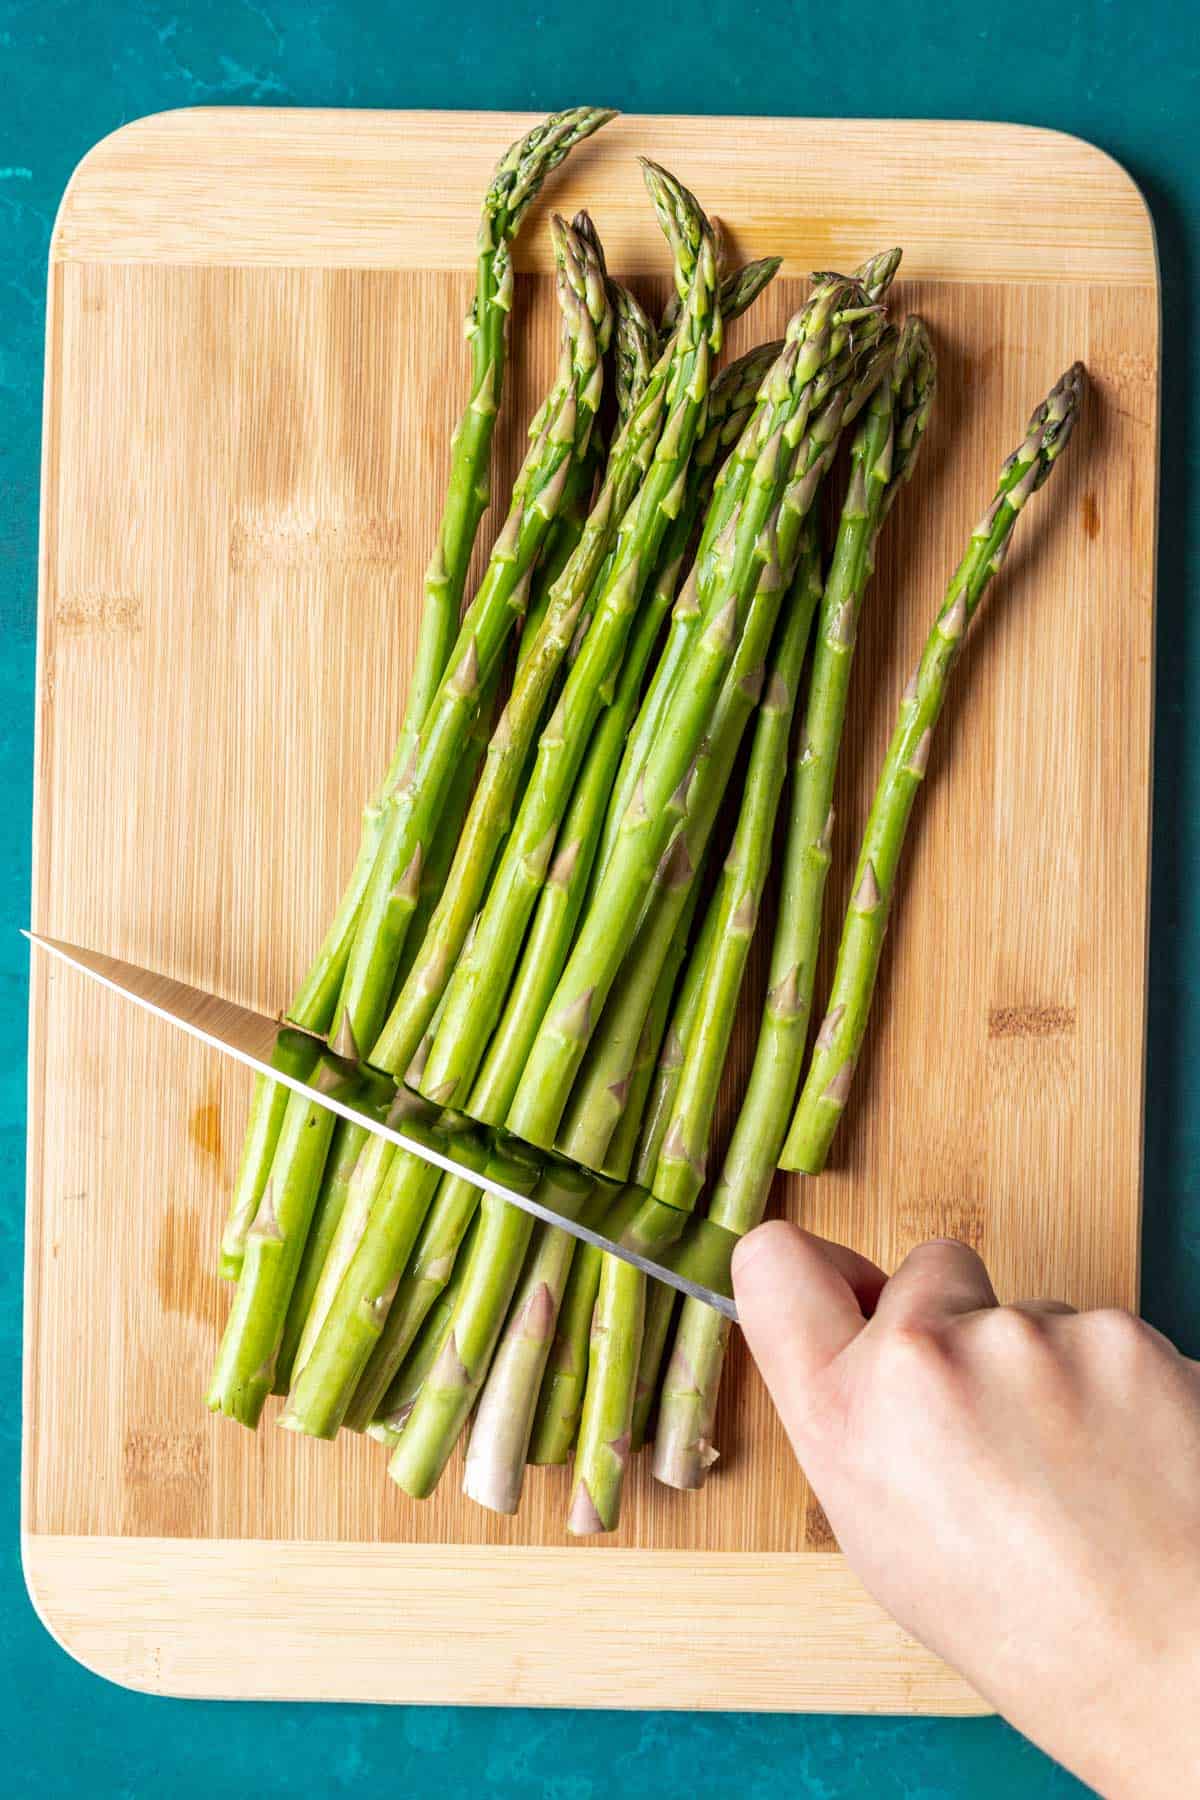 Cutting the ends off of asparagus stalks.